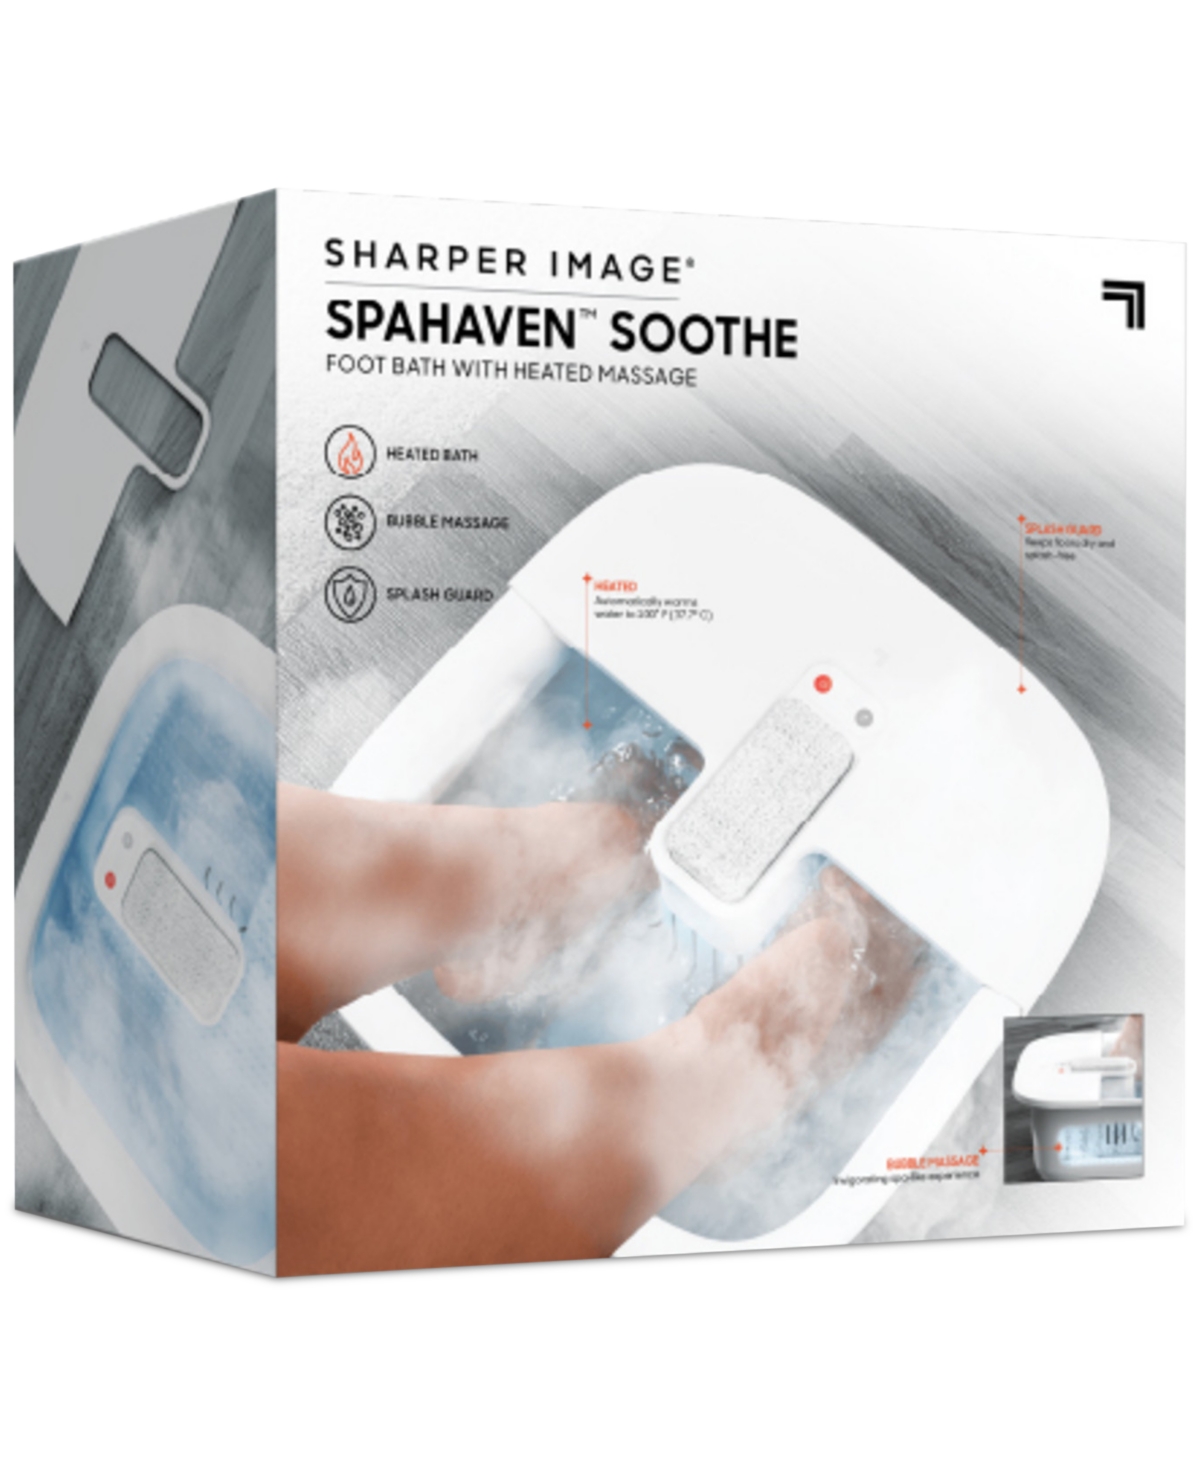 Shop Sharper Image Spahaven Soothe Heated Foot Bath In White